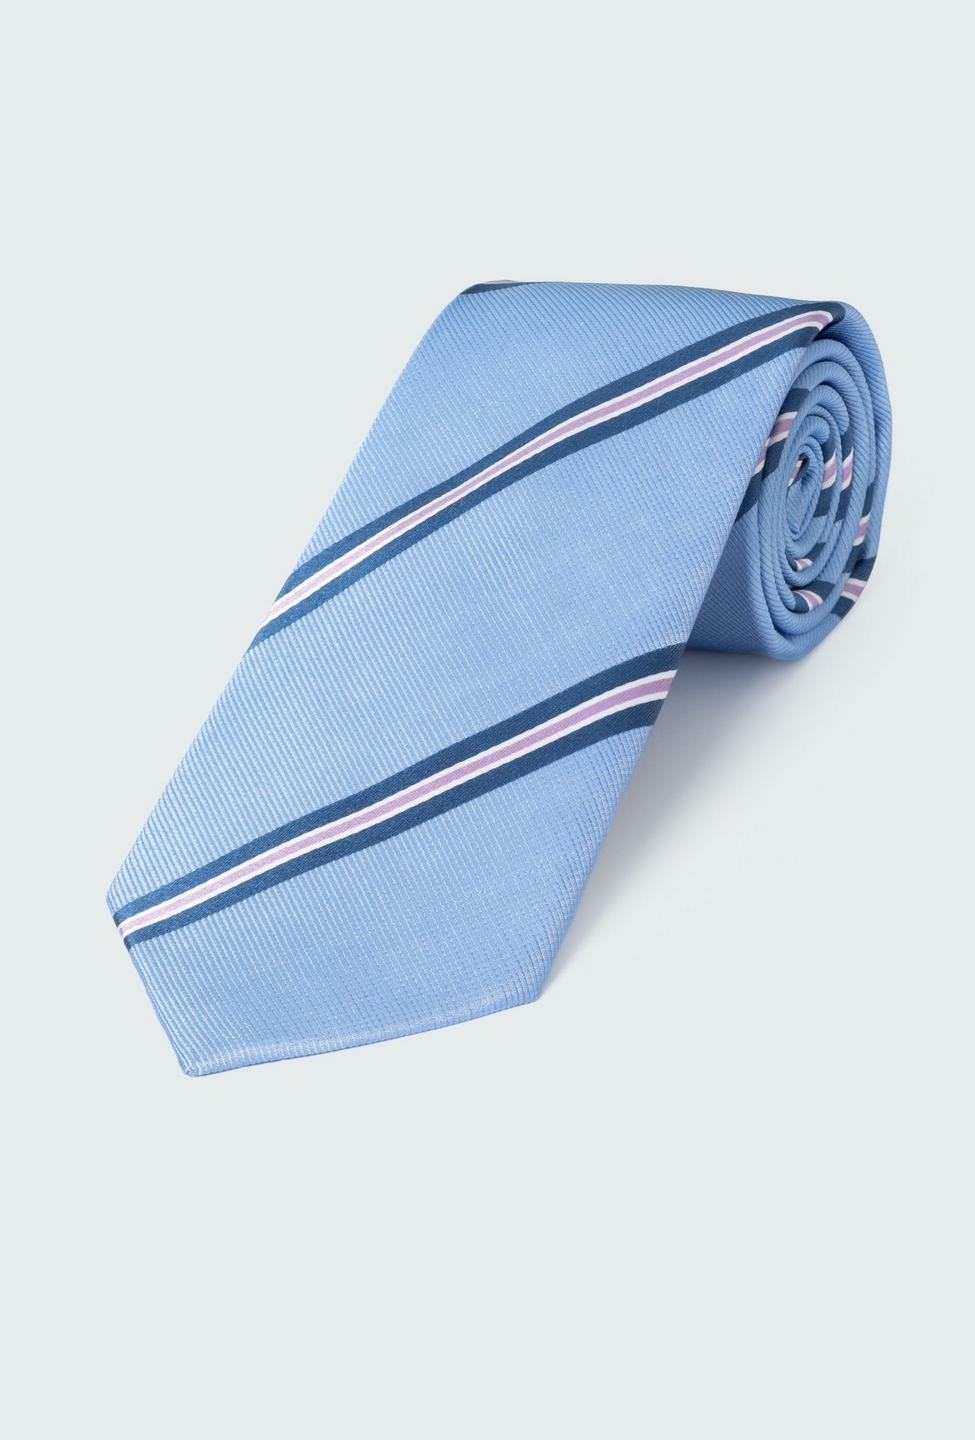 Blue tie - Striped Design from Indochino Collection